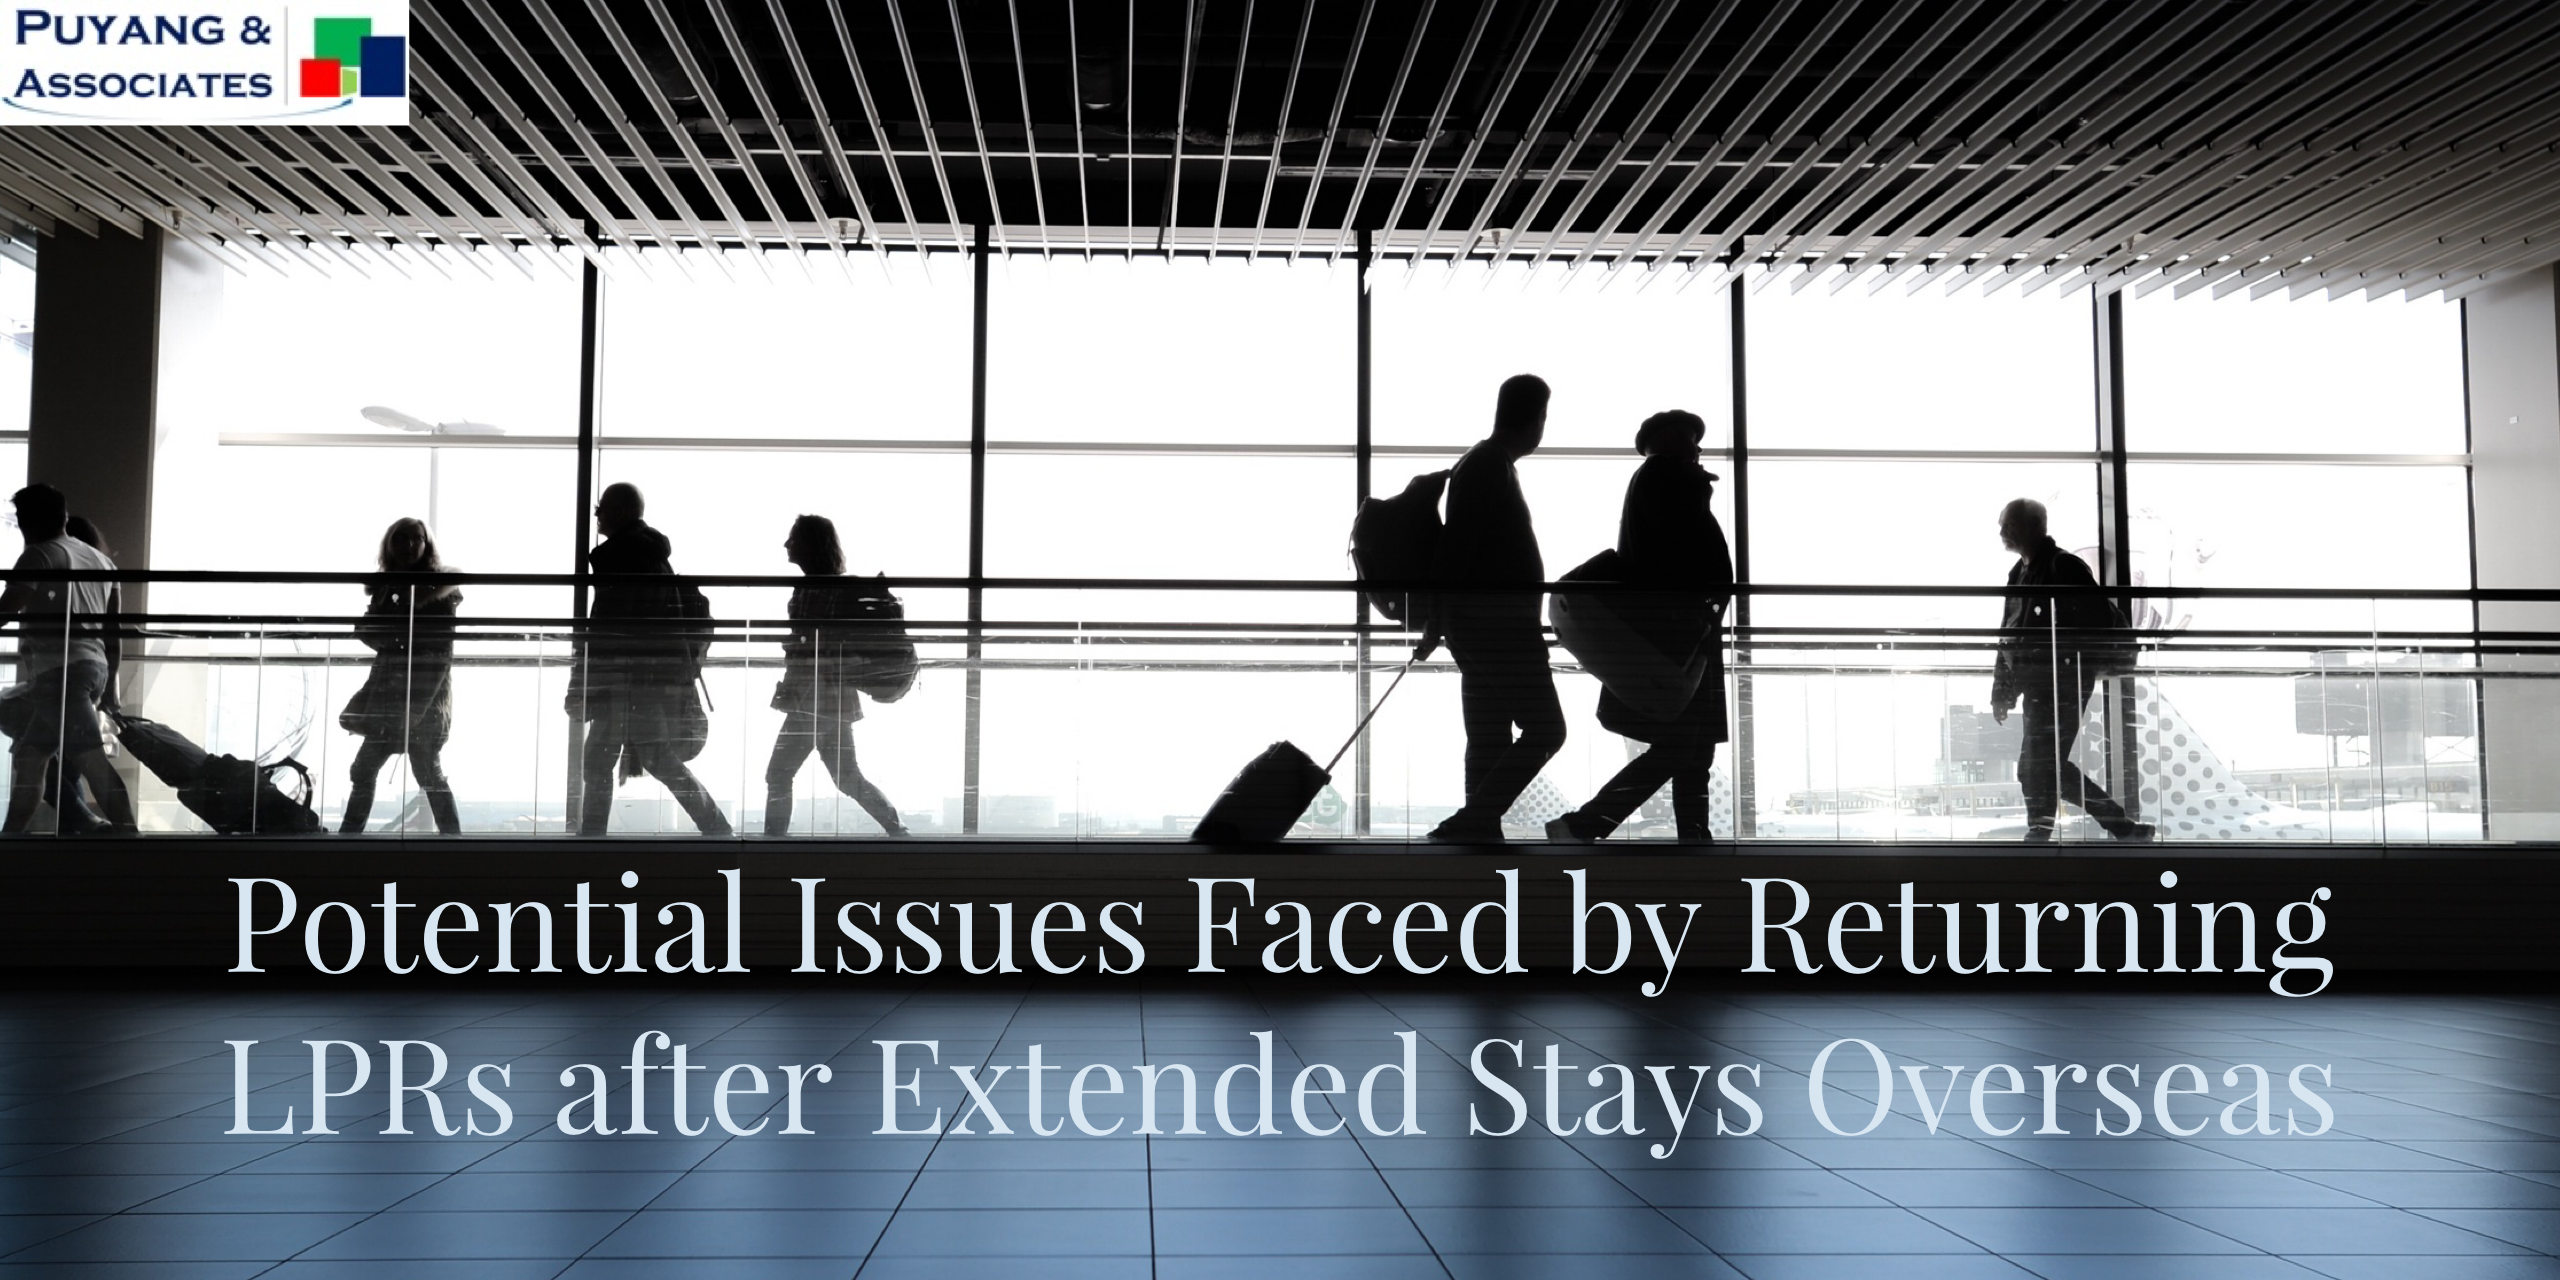 Potential Issues Faced by Returning LPRs after Extended Stays Overseas